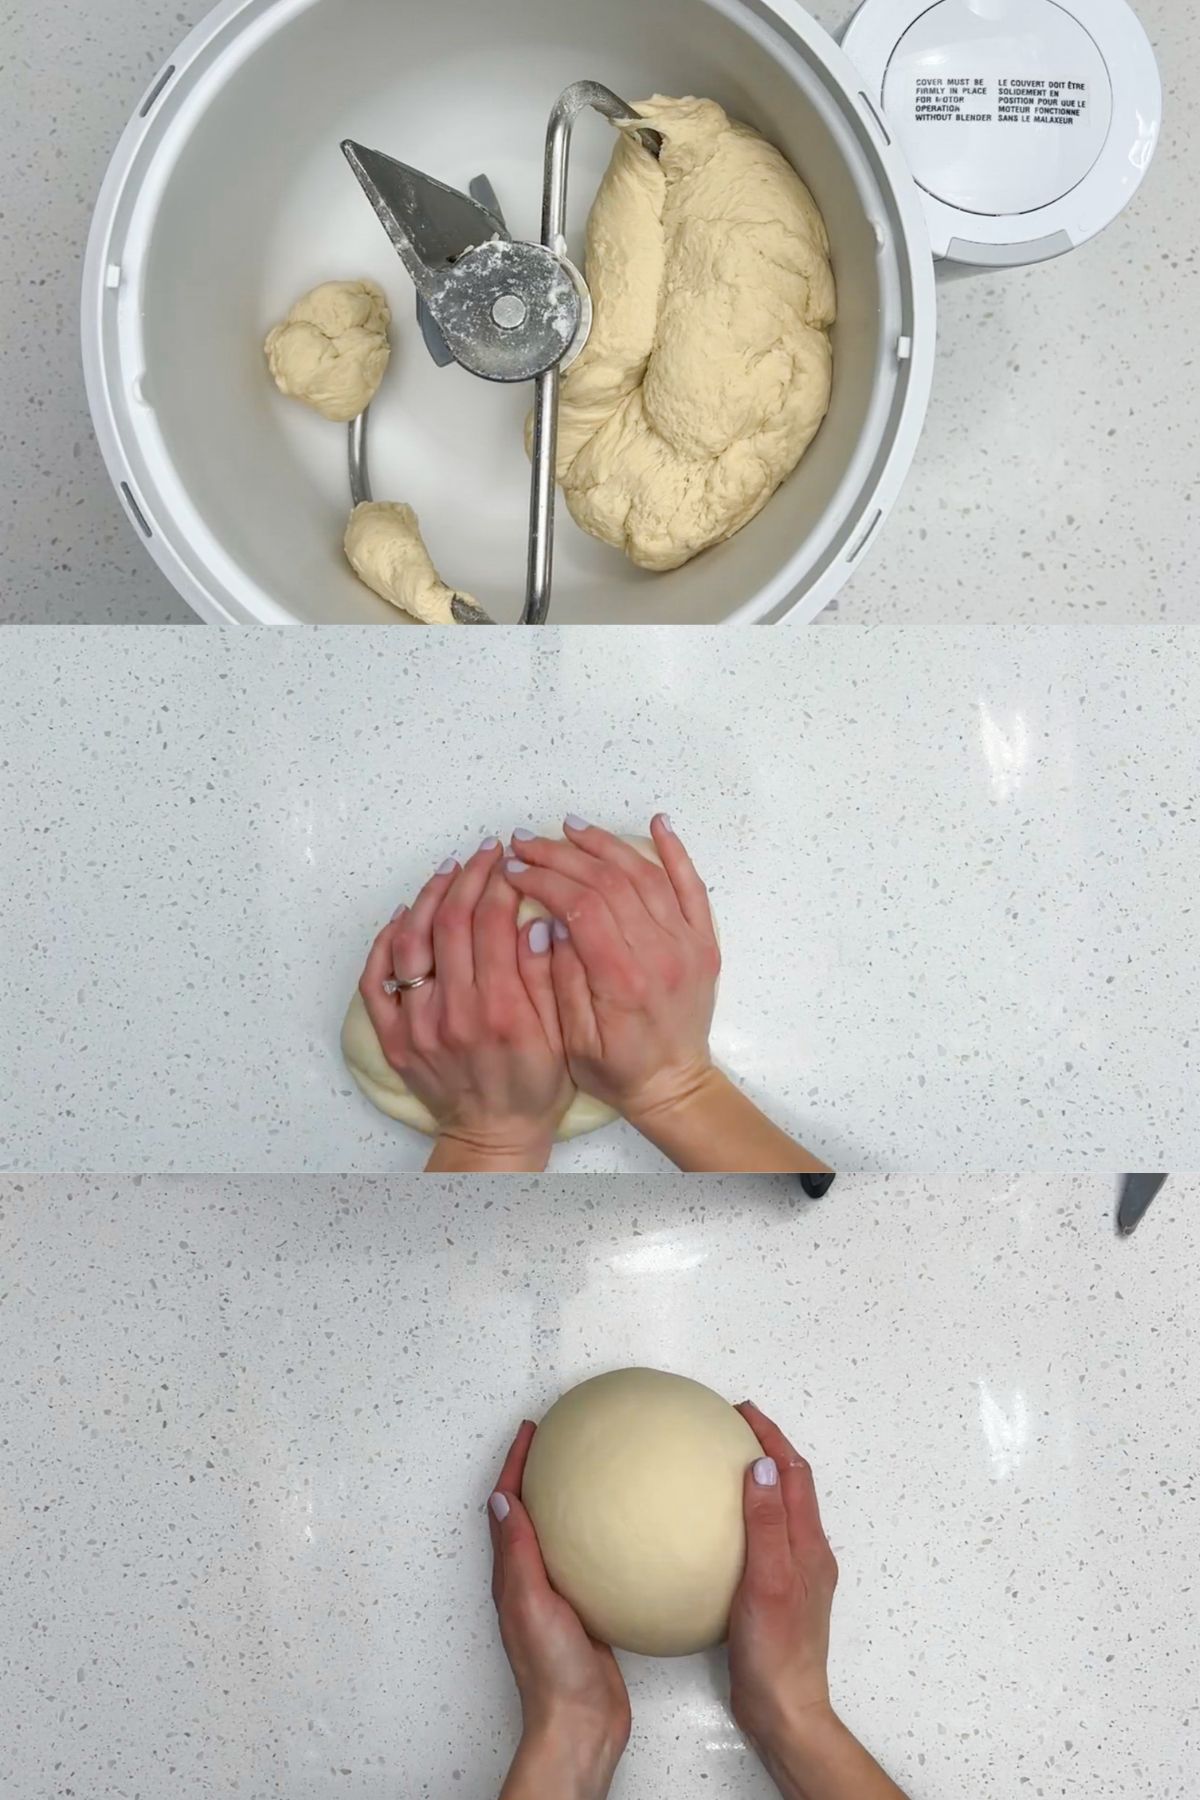 A collage of mixing the dough, kneading the dough and shaping it into a ball.